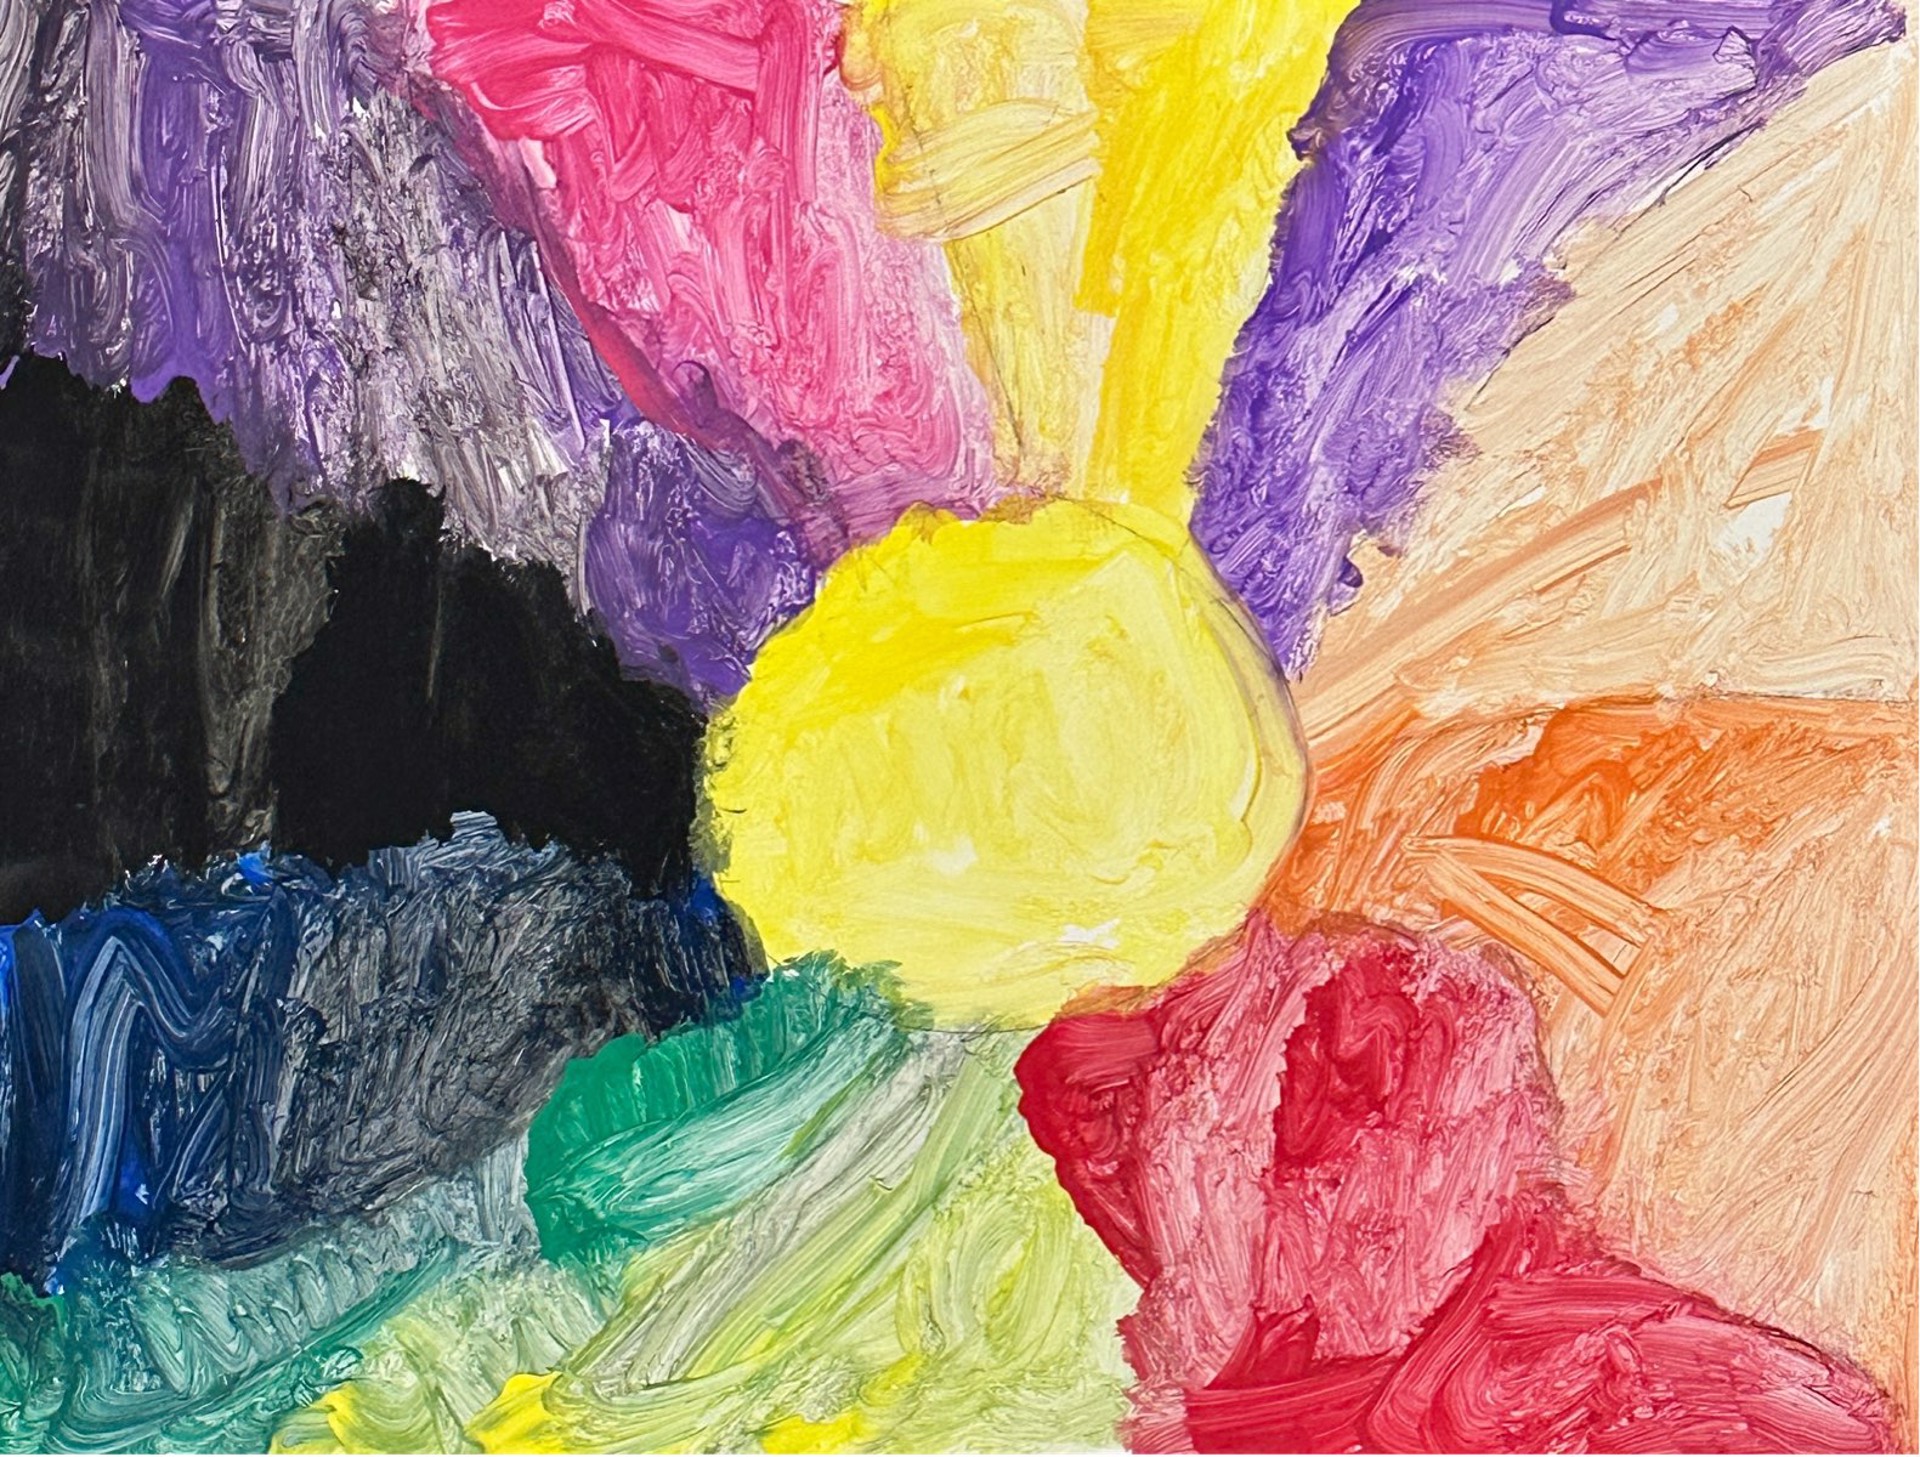 "Spectrum" by EAS Artist by Autism Academy